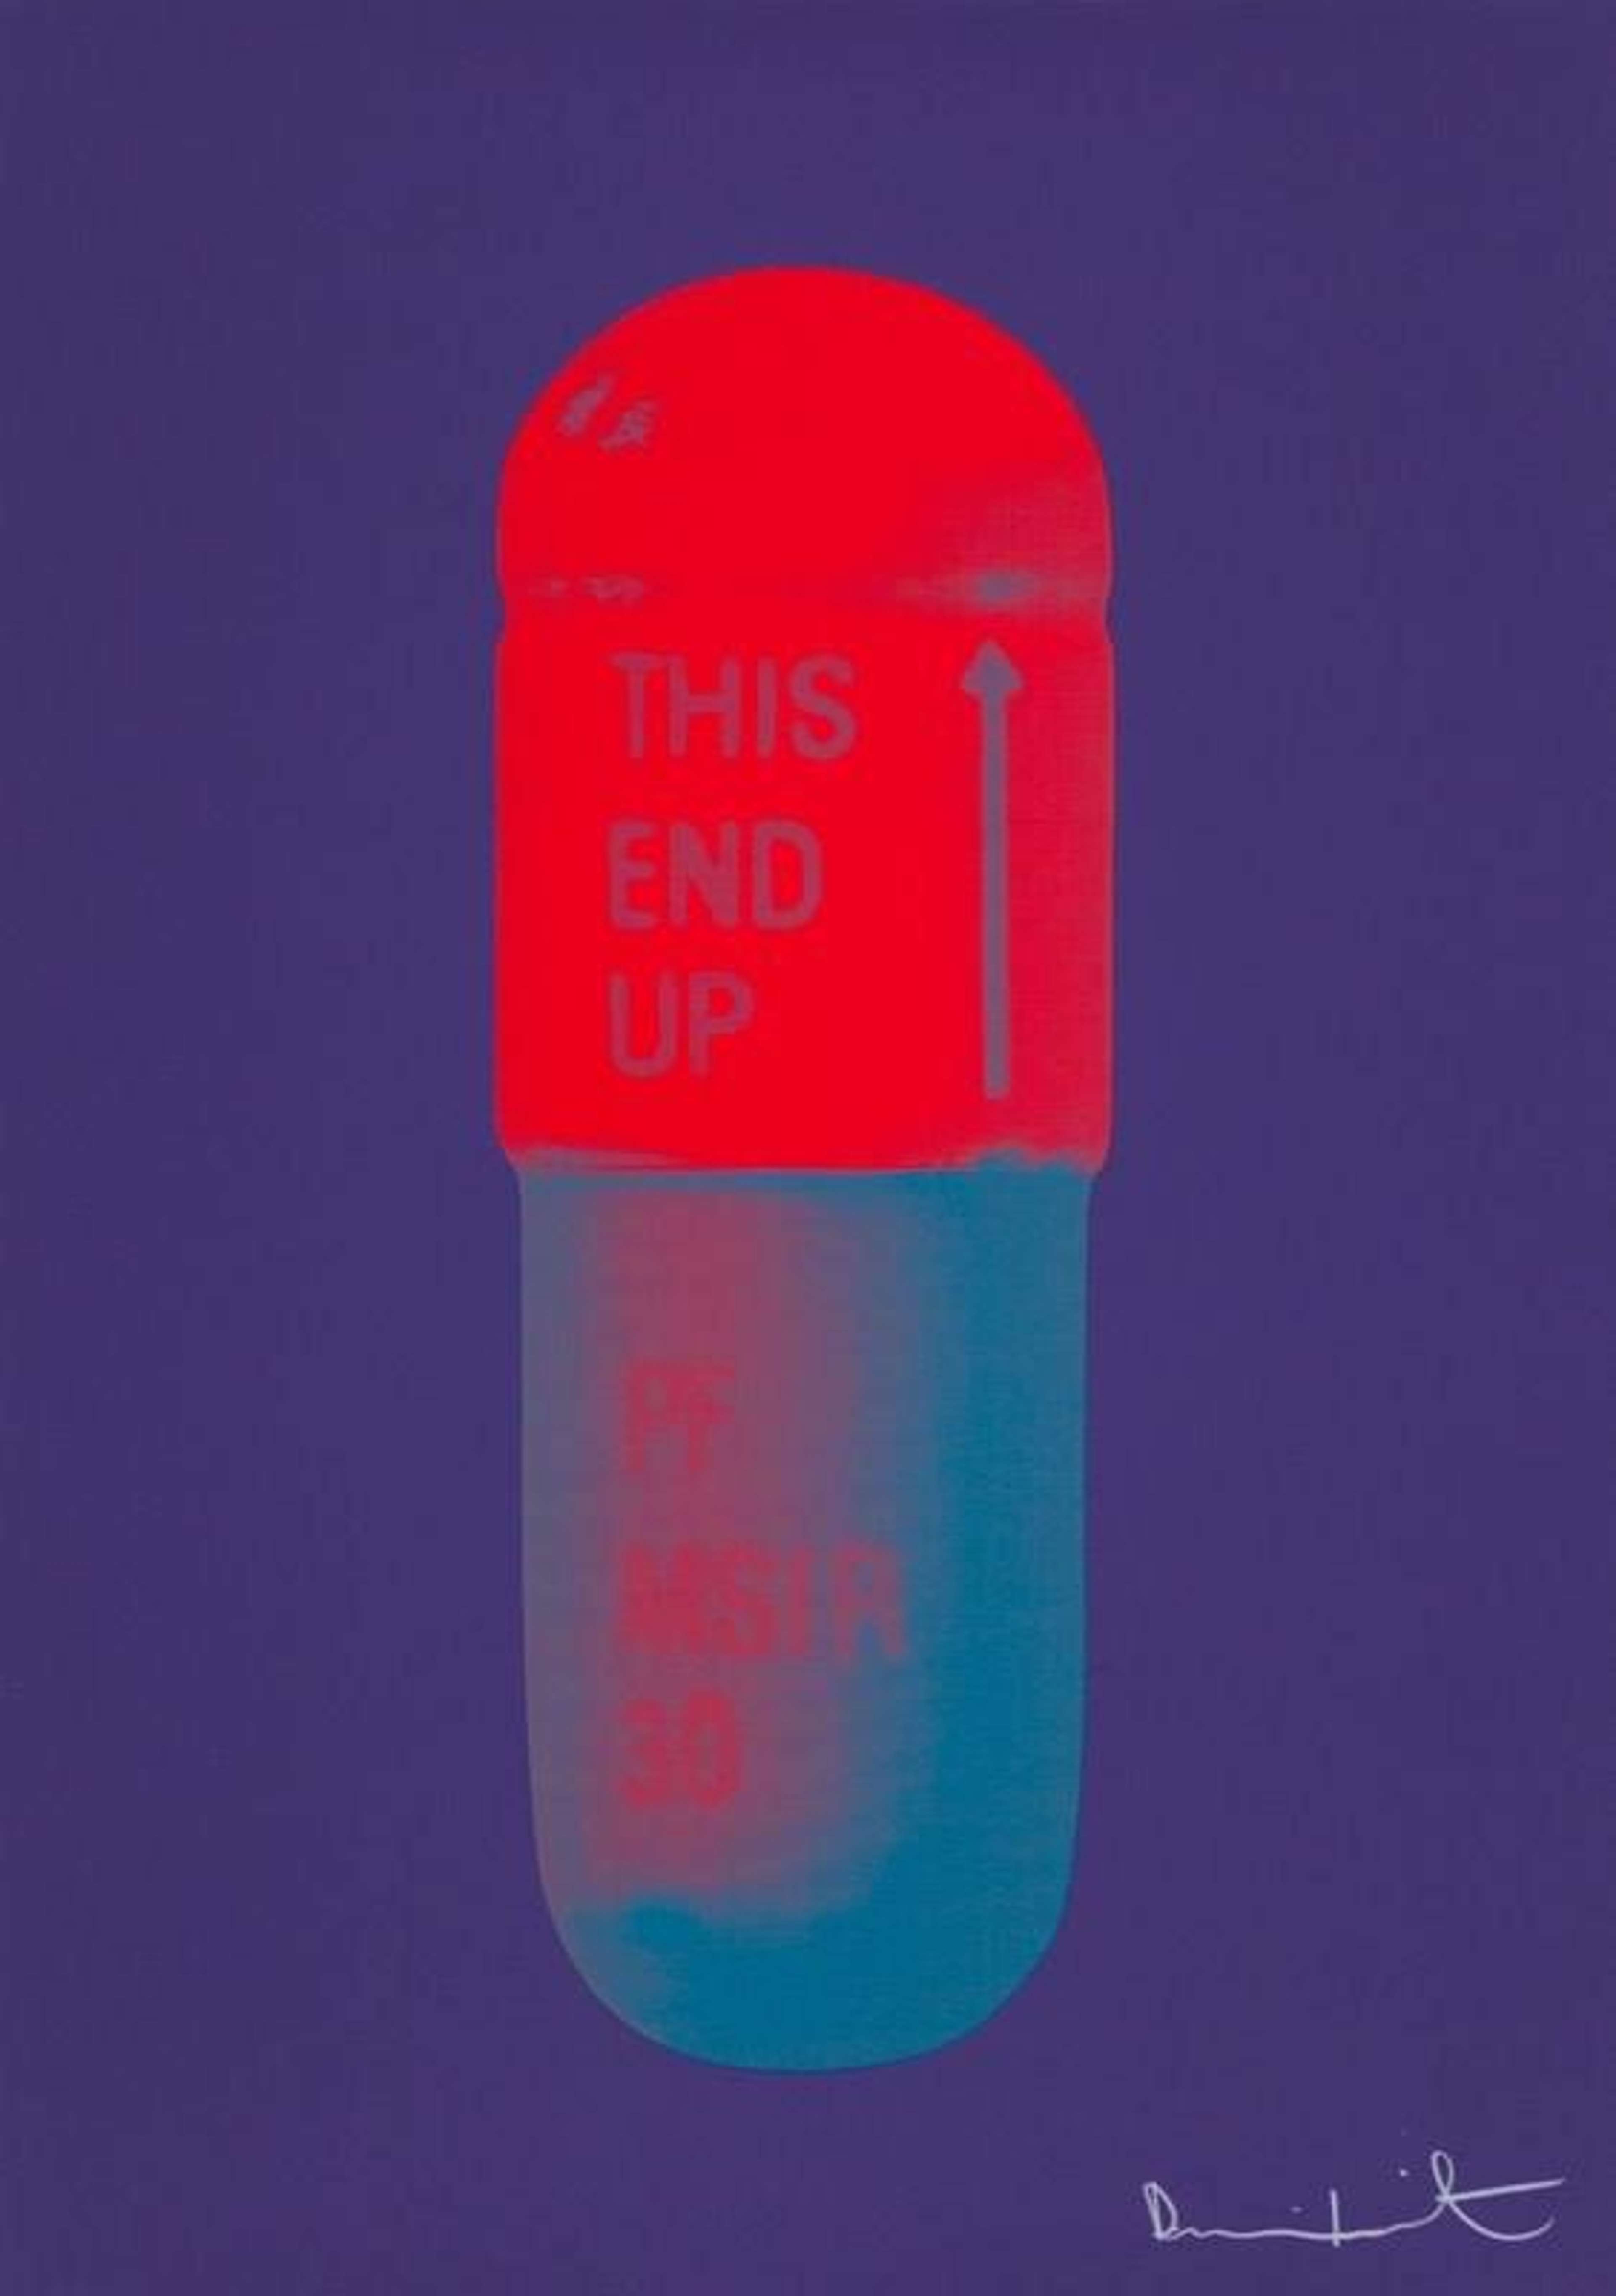 The Cure (violet, electric red, powder blue) - Signed Print by Damien Hirst 2014 - MyArtBroker